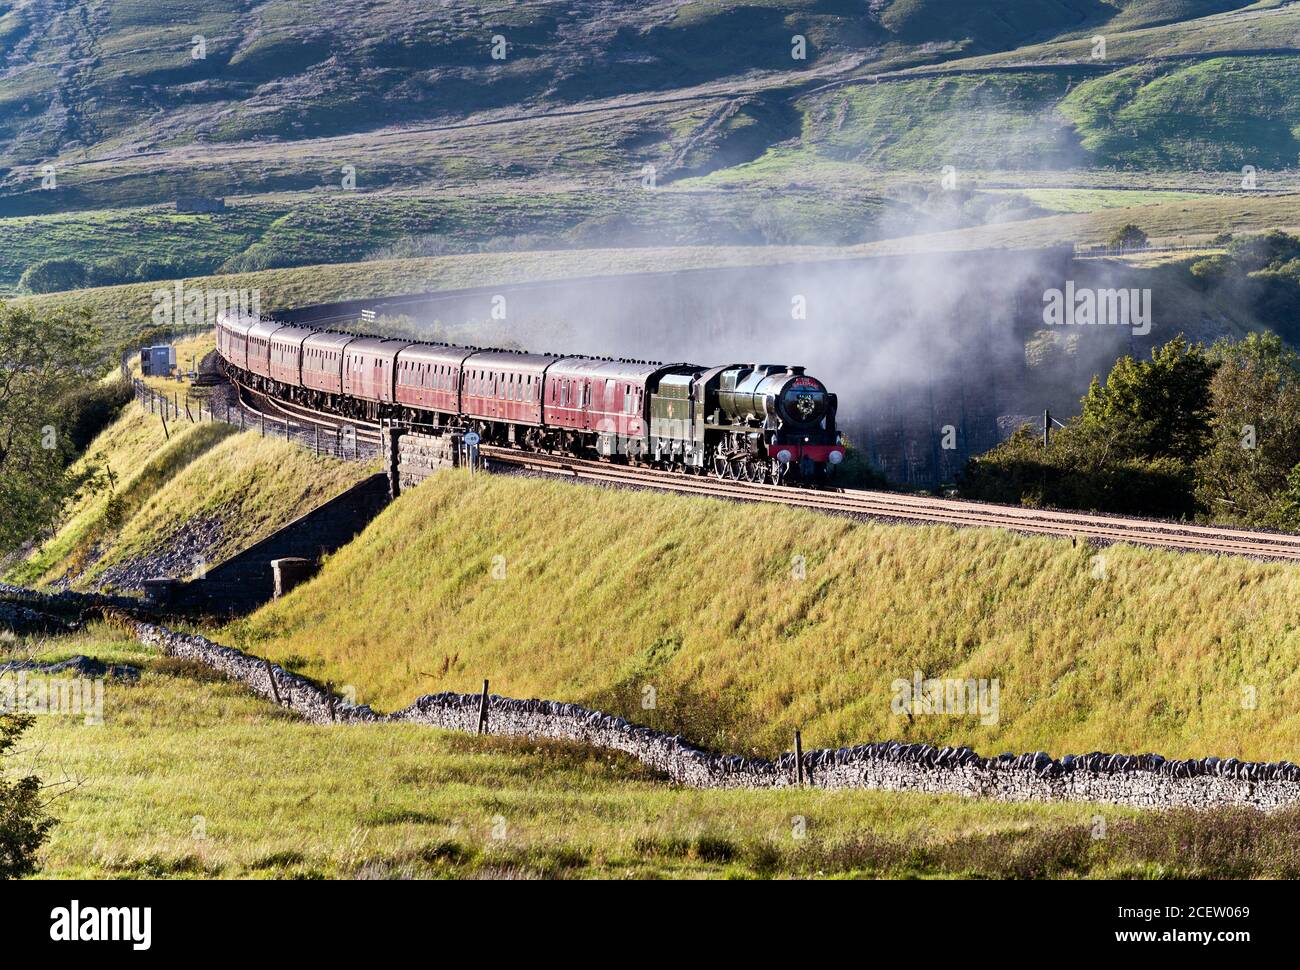 Steam loco 'Scots Guardsman' crosses Ribblehead Viaduct with 'The Dalesman' train on the Settle-Carlisle railway, Yorkshire Dales National Park, UK. Stock Photo